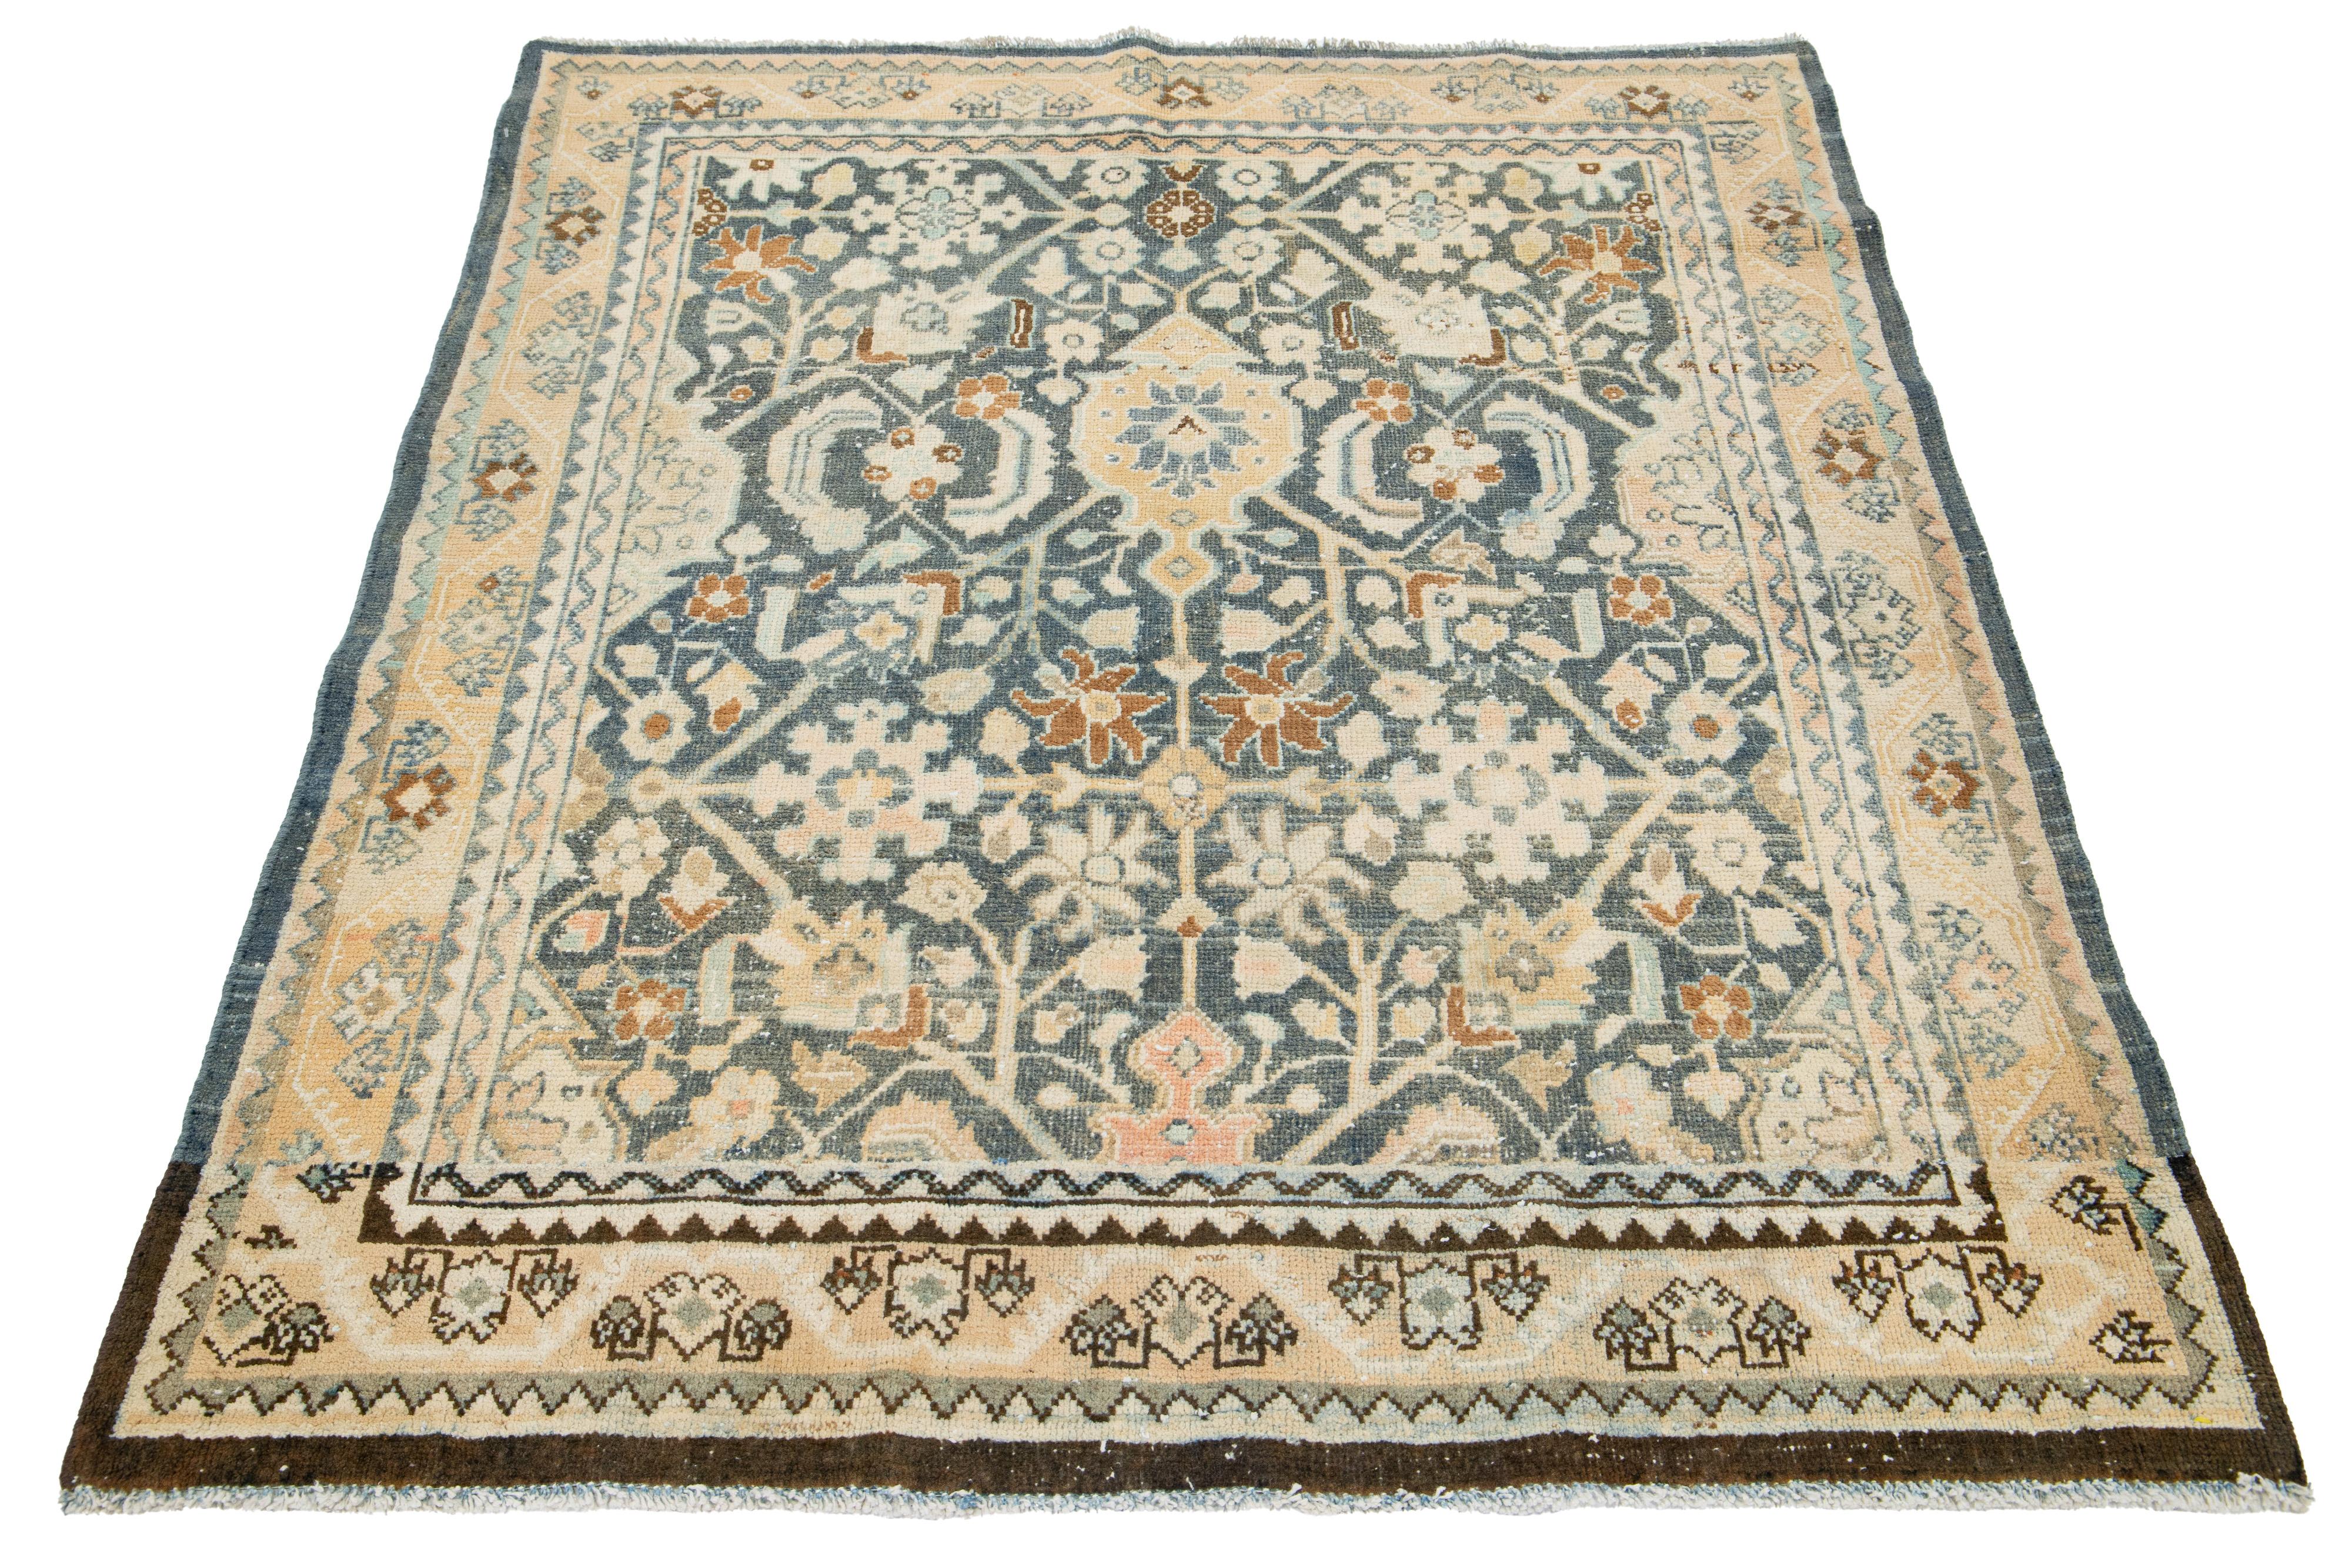 This is an antique Persian Malayer rug, hand-knotted with wool. It features a timeless classical pattern with a beautiful blue field adorned with beige highlights.

This rug measures 4'5